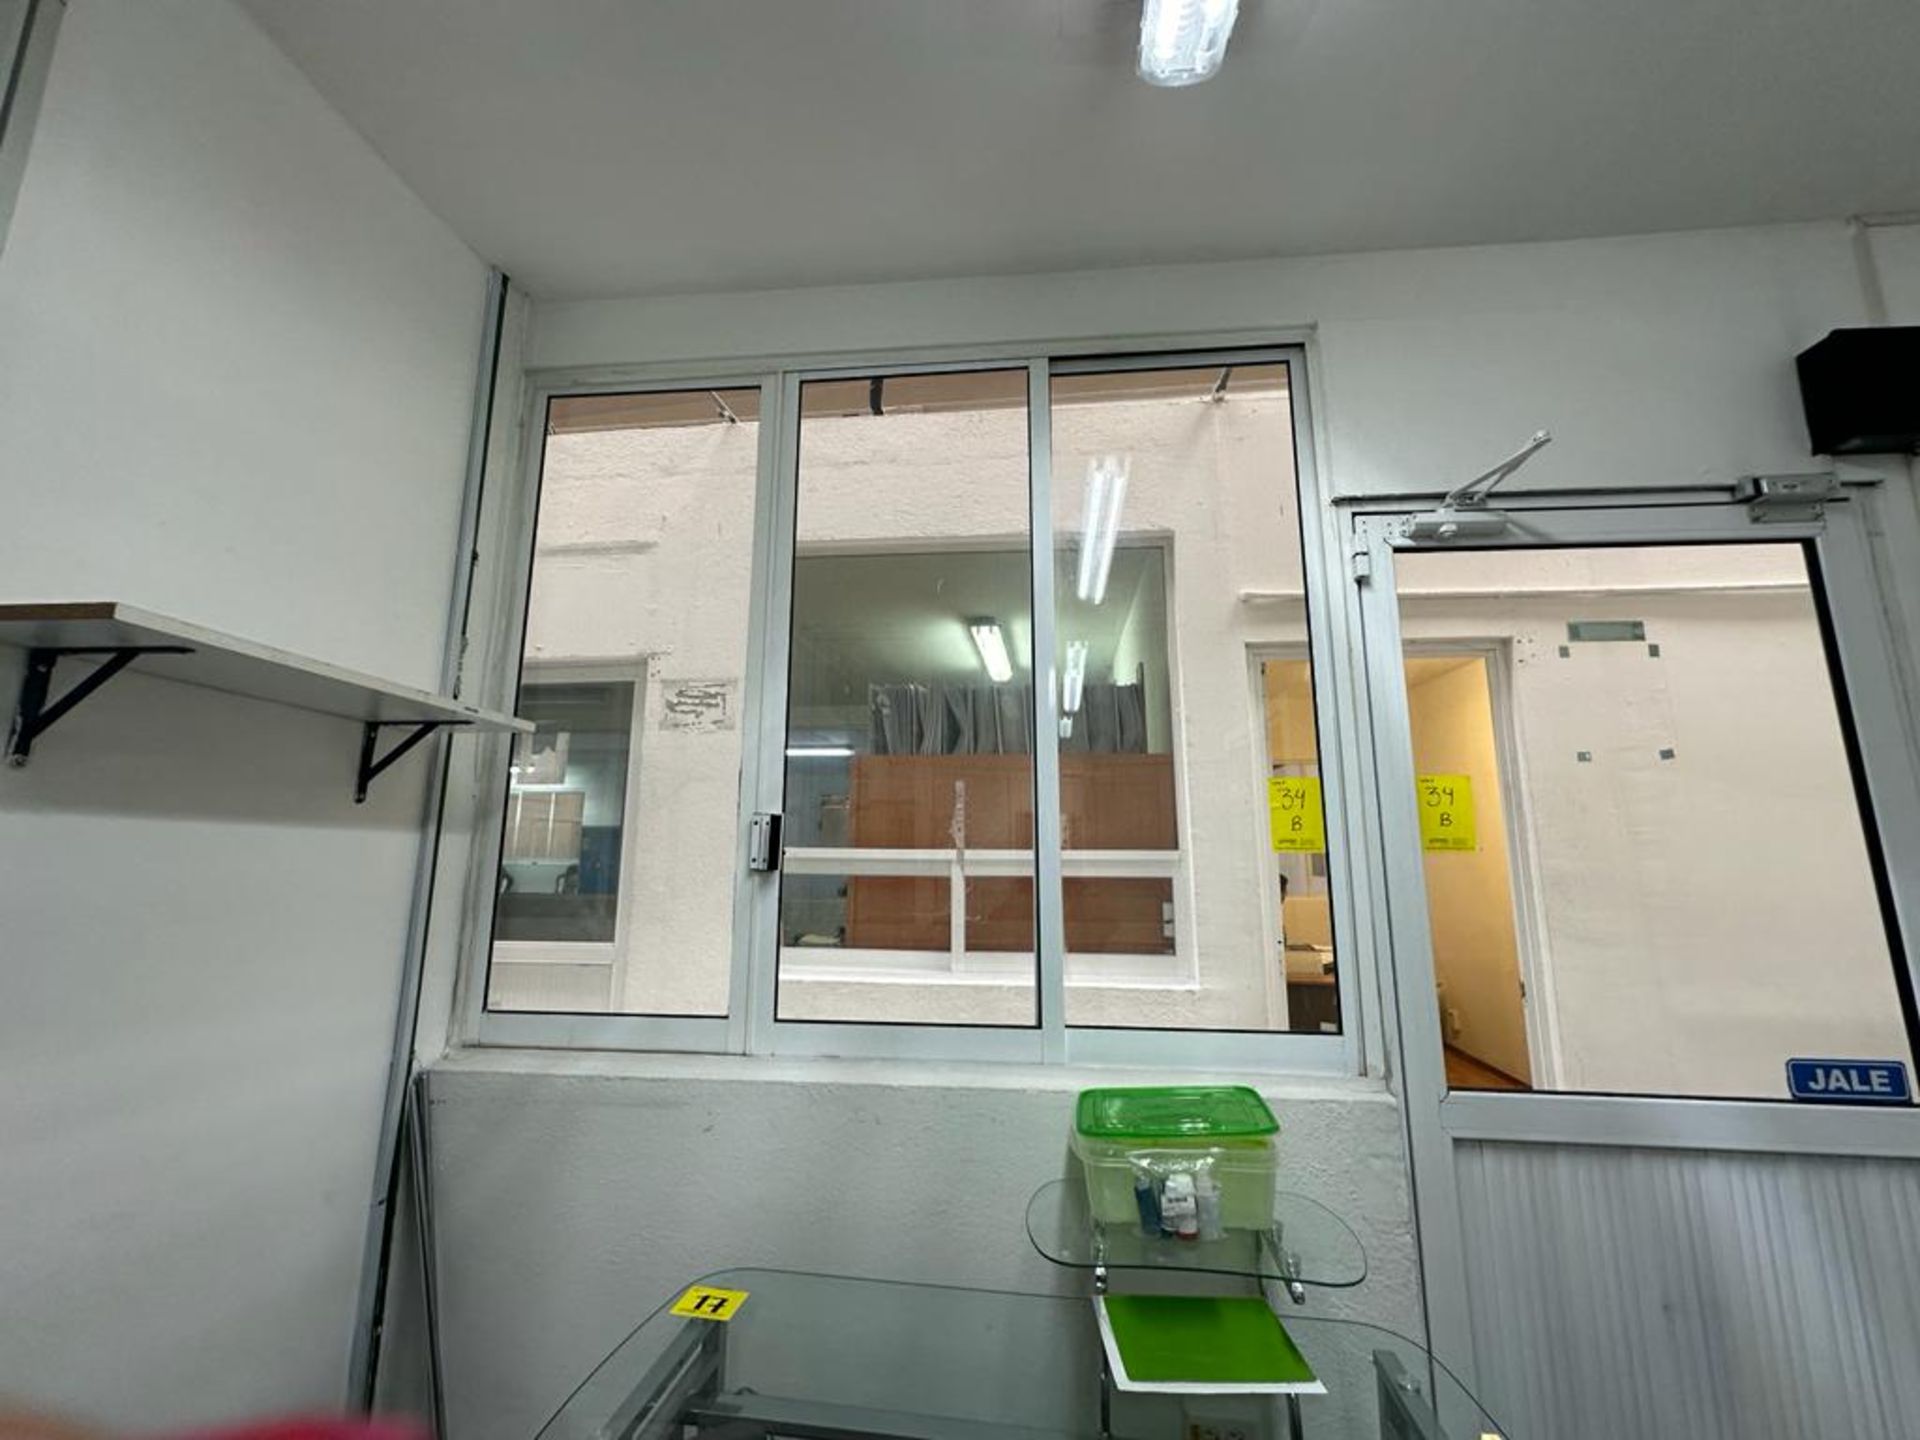 Lot consists of: 1 aluminum window with glass measures approximately 11.98 x 1.49 m; 1 aluminum - Image 19 of 26